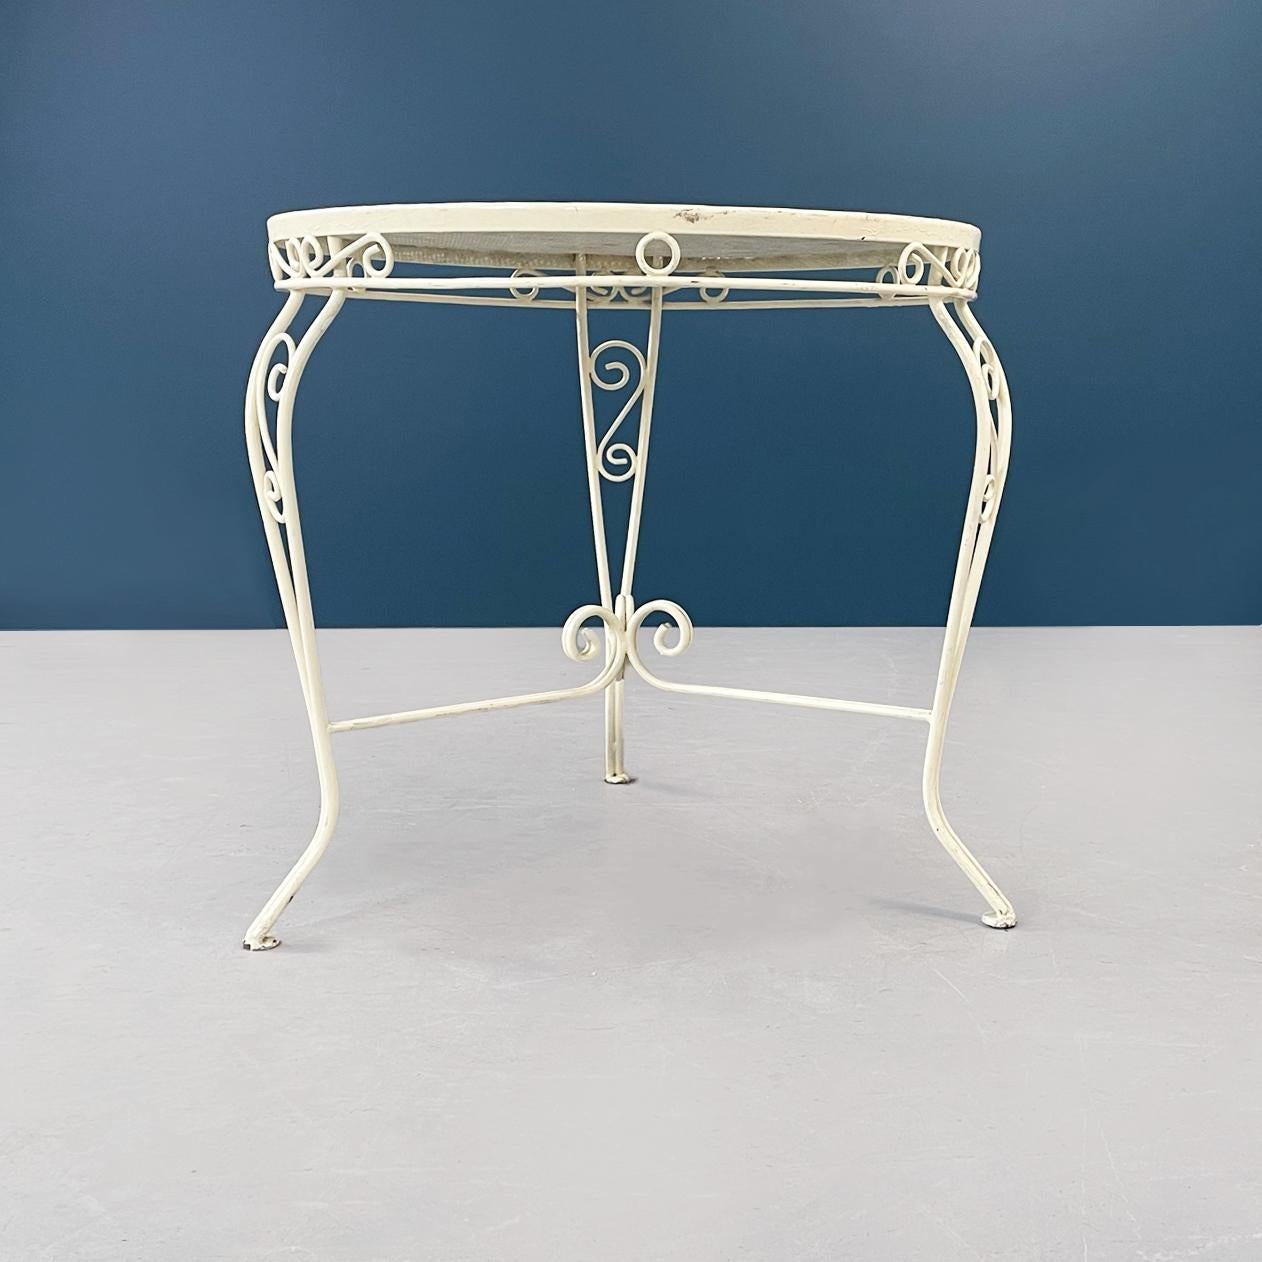 Italian Mid-Century Modern garden table in white wrought iron, 1960s
Garden table in cream white painted wrought iron.
The round top is perforated to consent the use in outdoor
The edge of the top and the three legs are finely worked with curls and